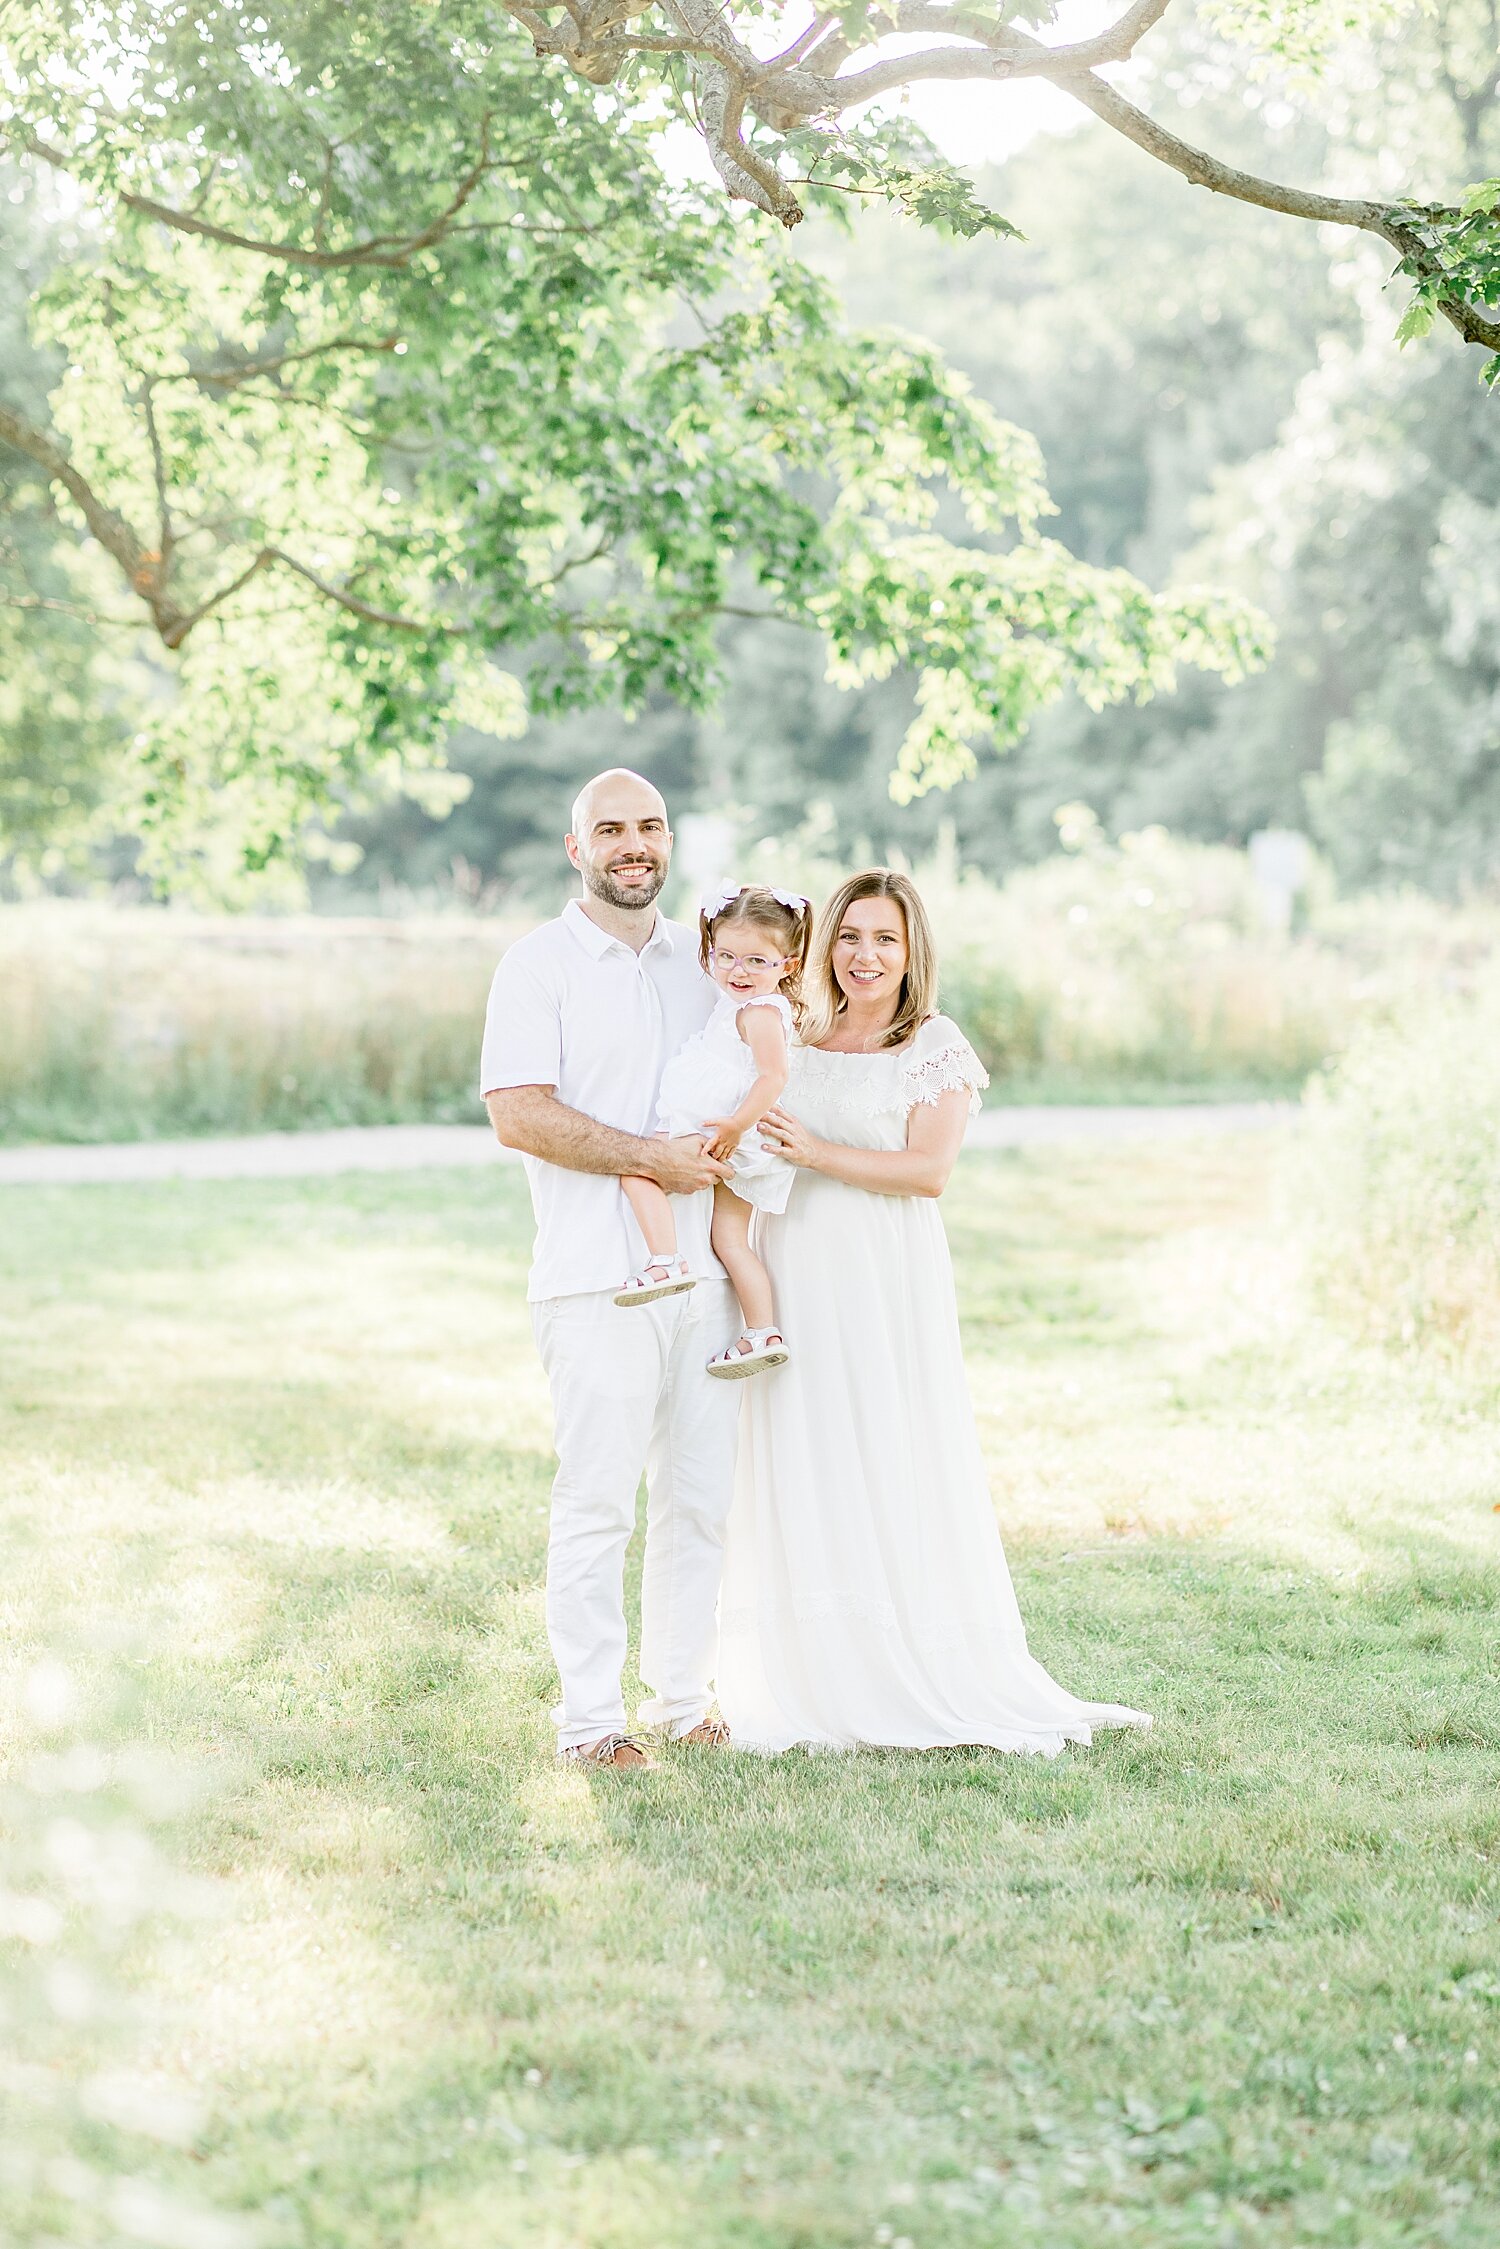 Summer maternity session at Waveny Park. Photos by Darien Family Photographer, Kristin Wood Photography. 